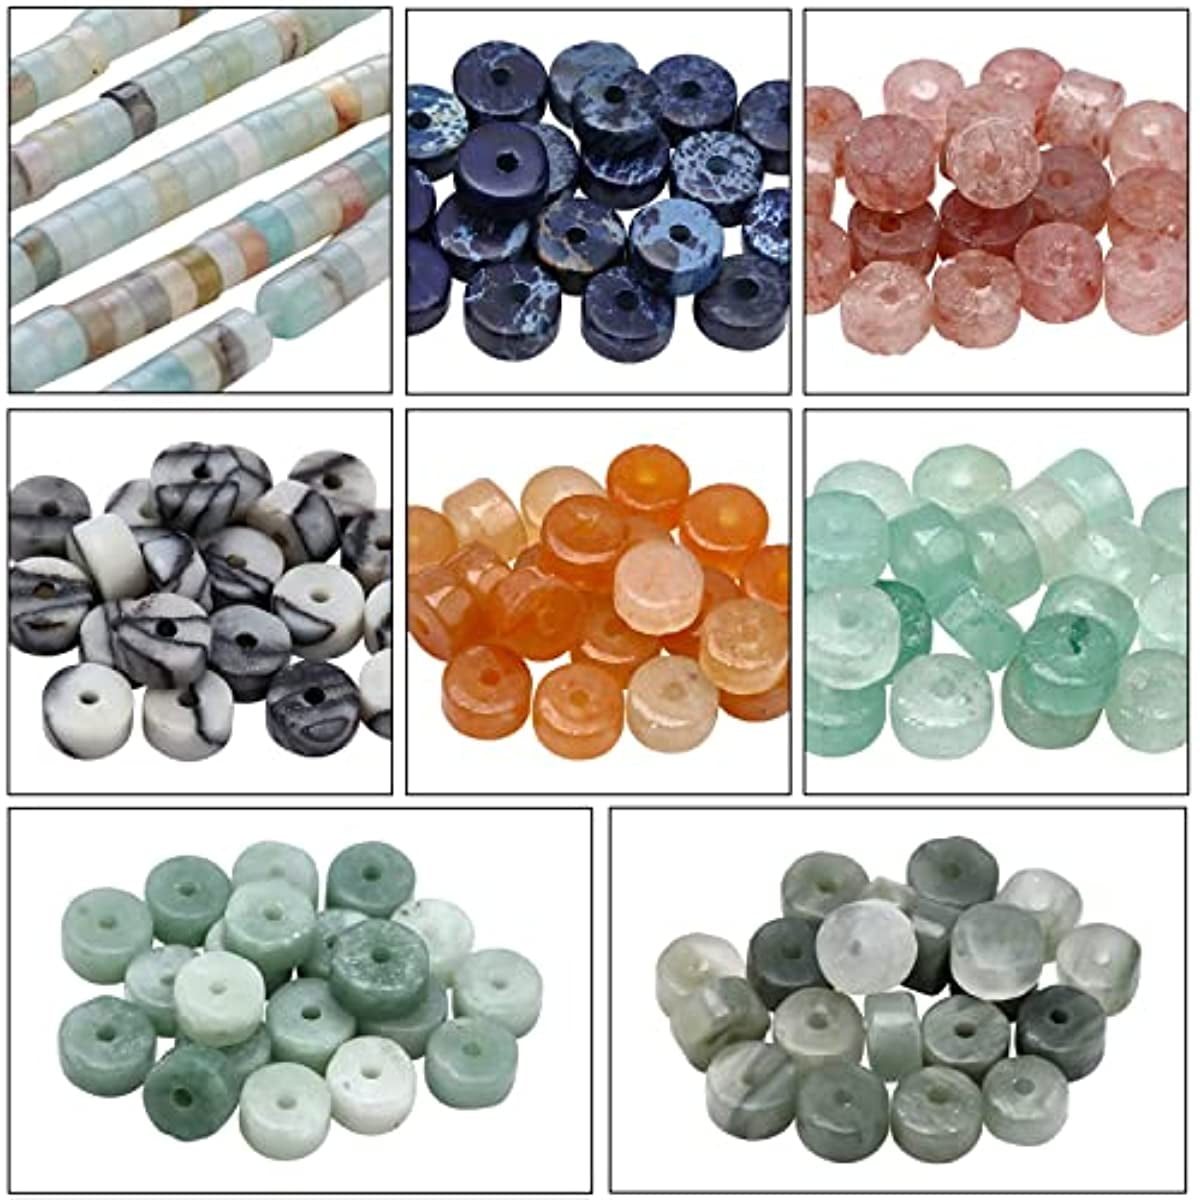 50-60 PCS Assorted Glass Beads for Jewelry Making Adults, Large and Small  Bulk Glass Beads for Crafts, Craft Lampwork Murano Bead Mix for Bracelets  and Necklaces 